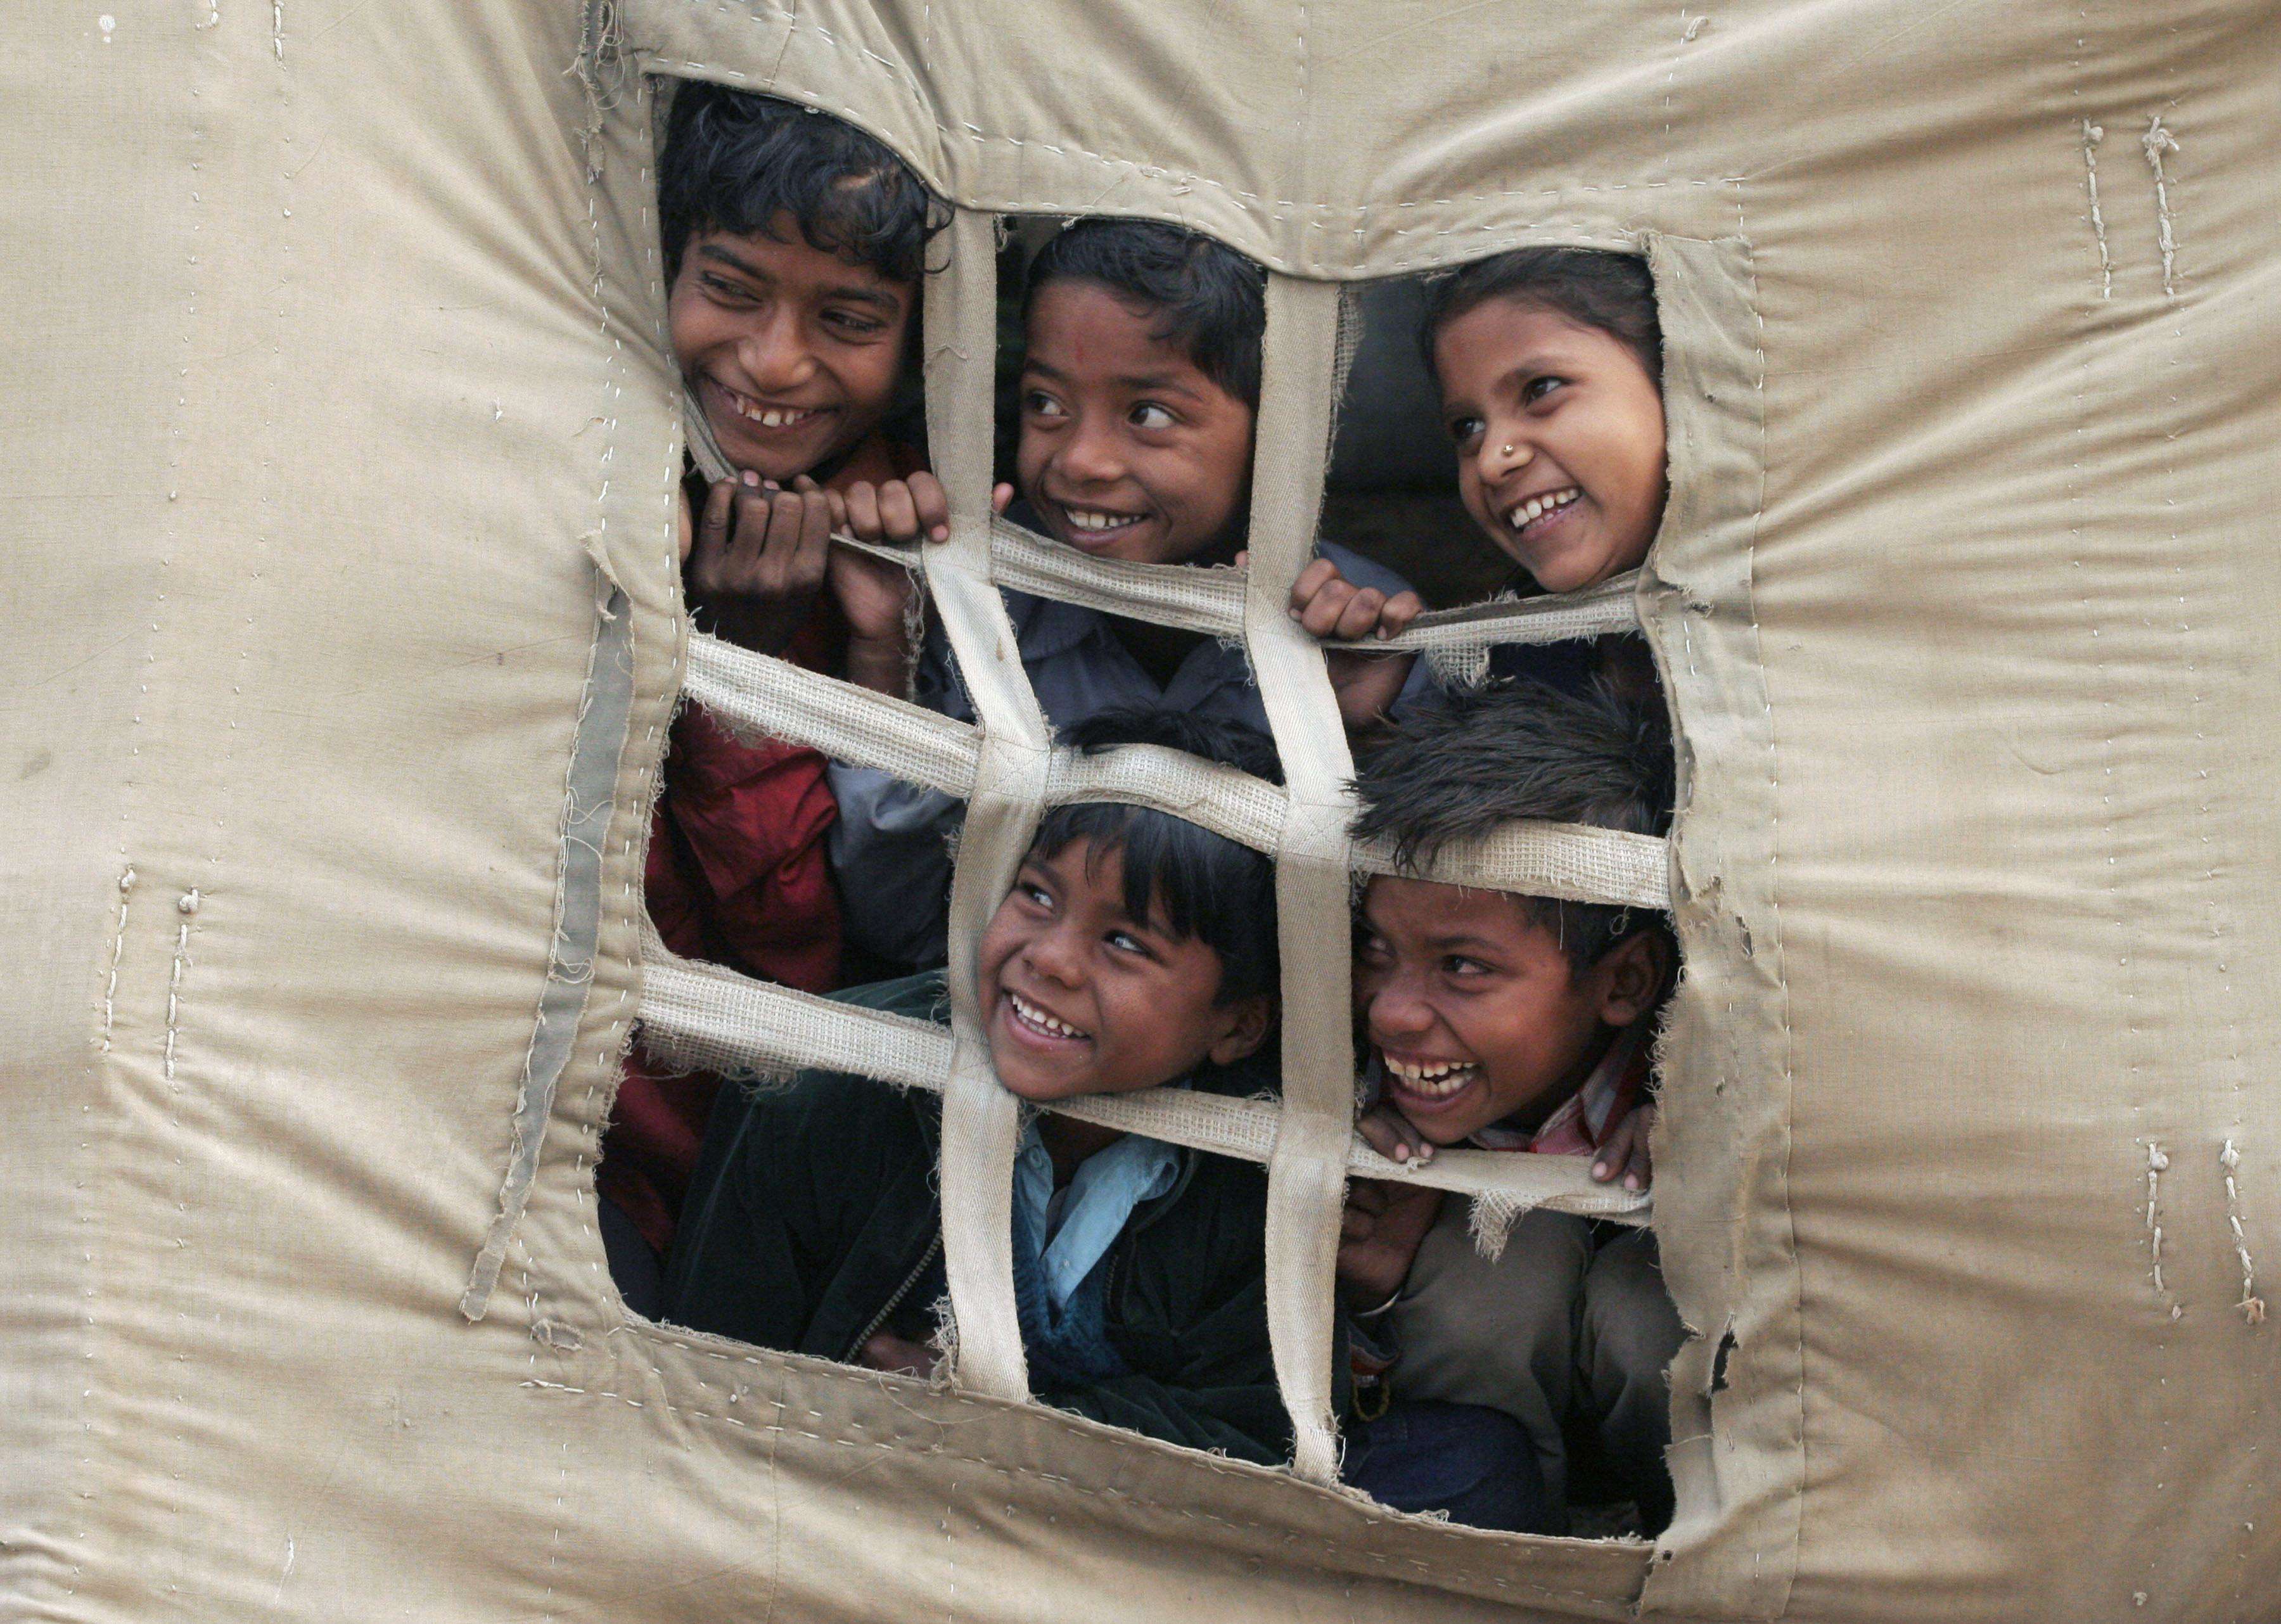 ** FOR USE AS DESIRED WITH YEAR END--FILE **In this Feb. 6, 2008 file photo, Indian children peek out of a tent at Sangam, the confluence of the Ganges and Yamuna rivers during the annual traditional fair of Magh Mela in Allahabad, India. (AP Photo/Rajesh Kumar Singh/FILE)